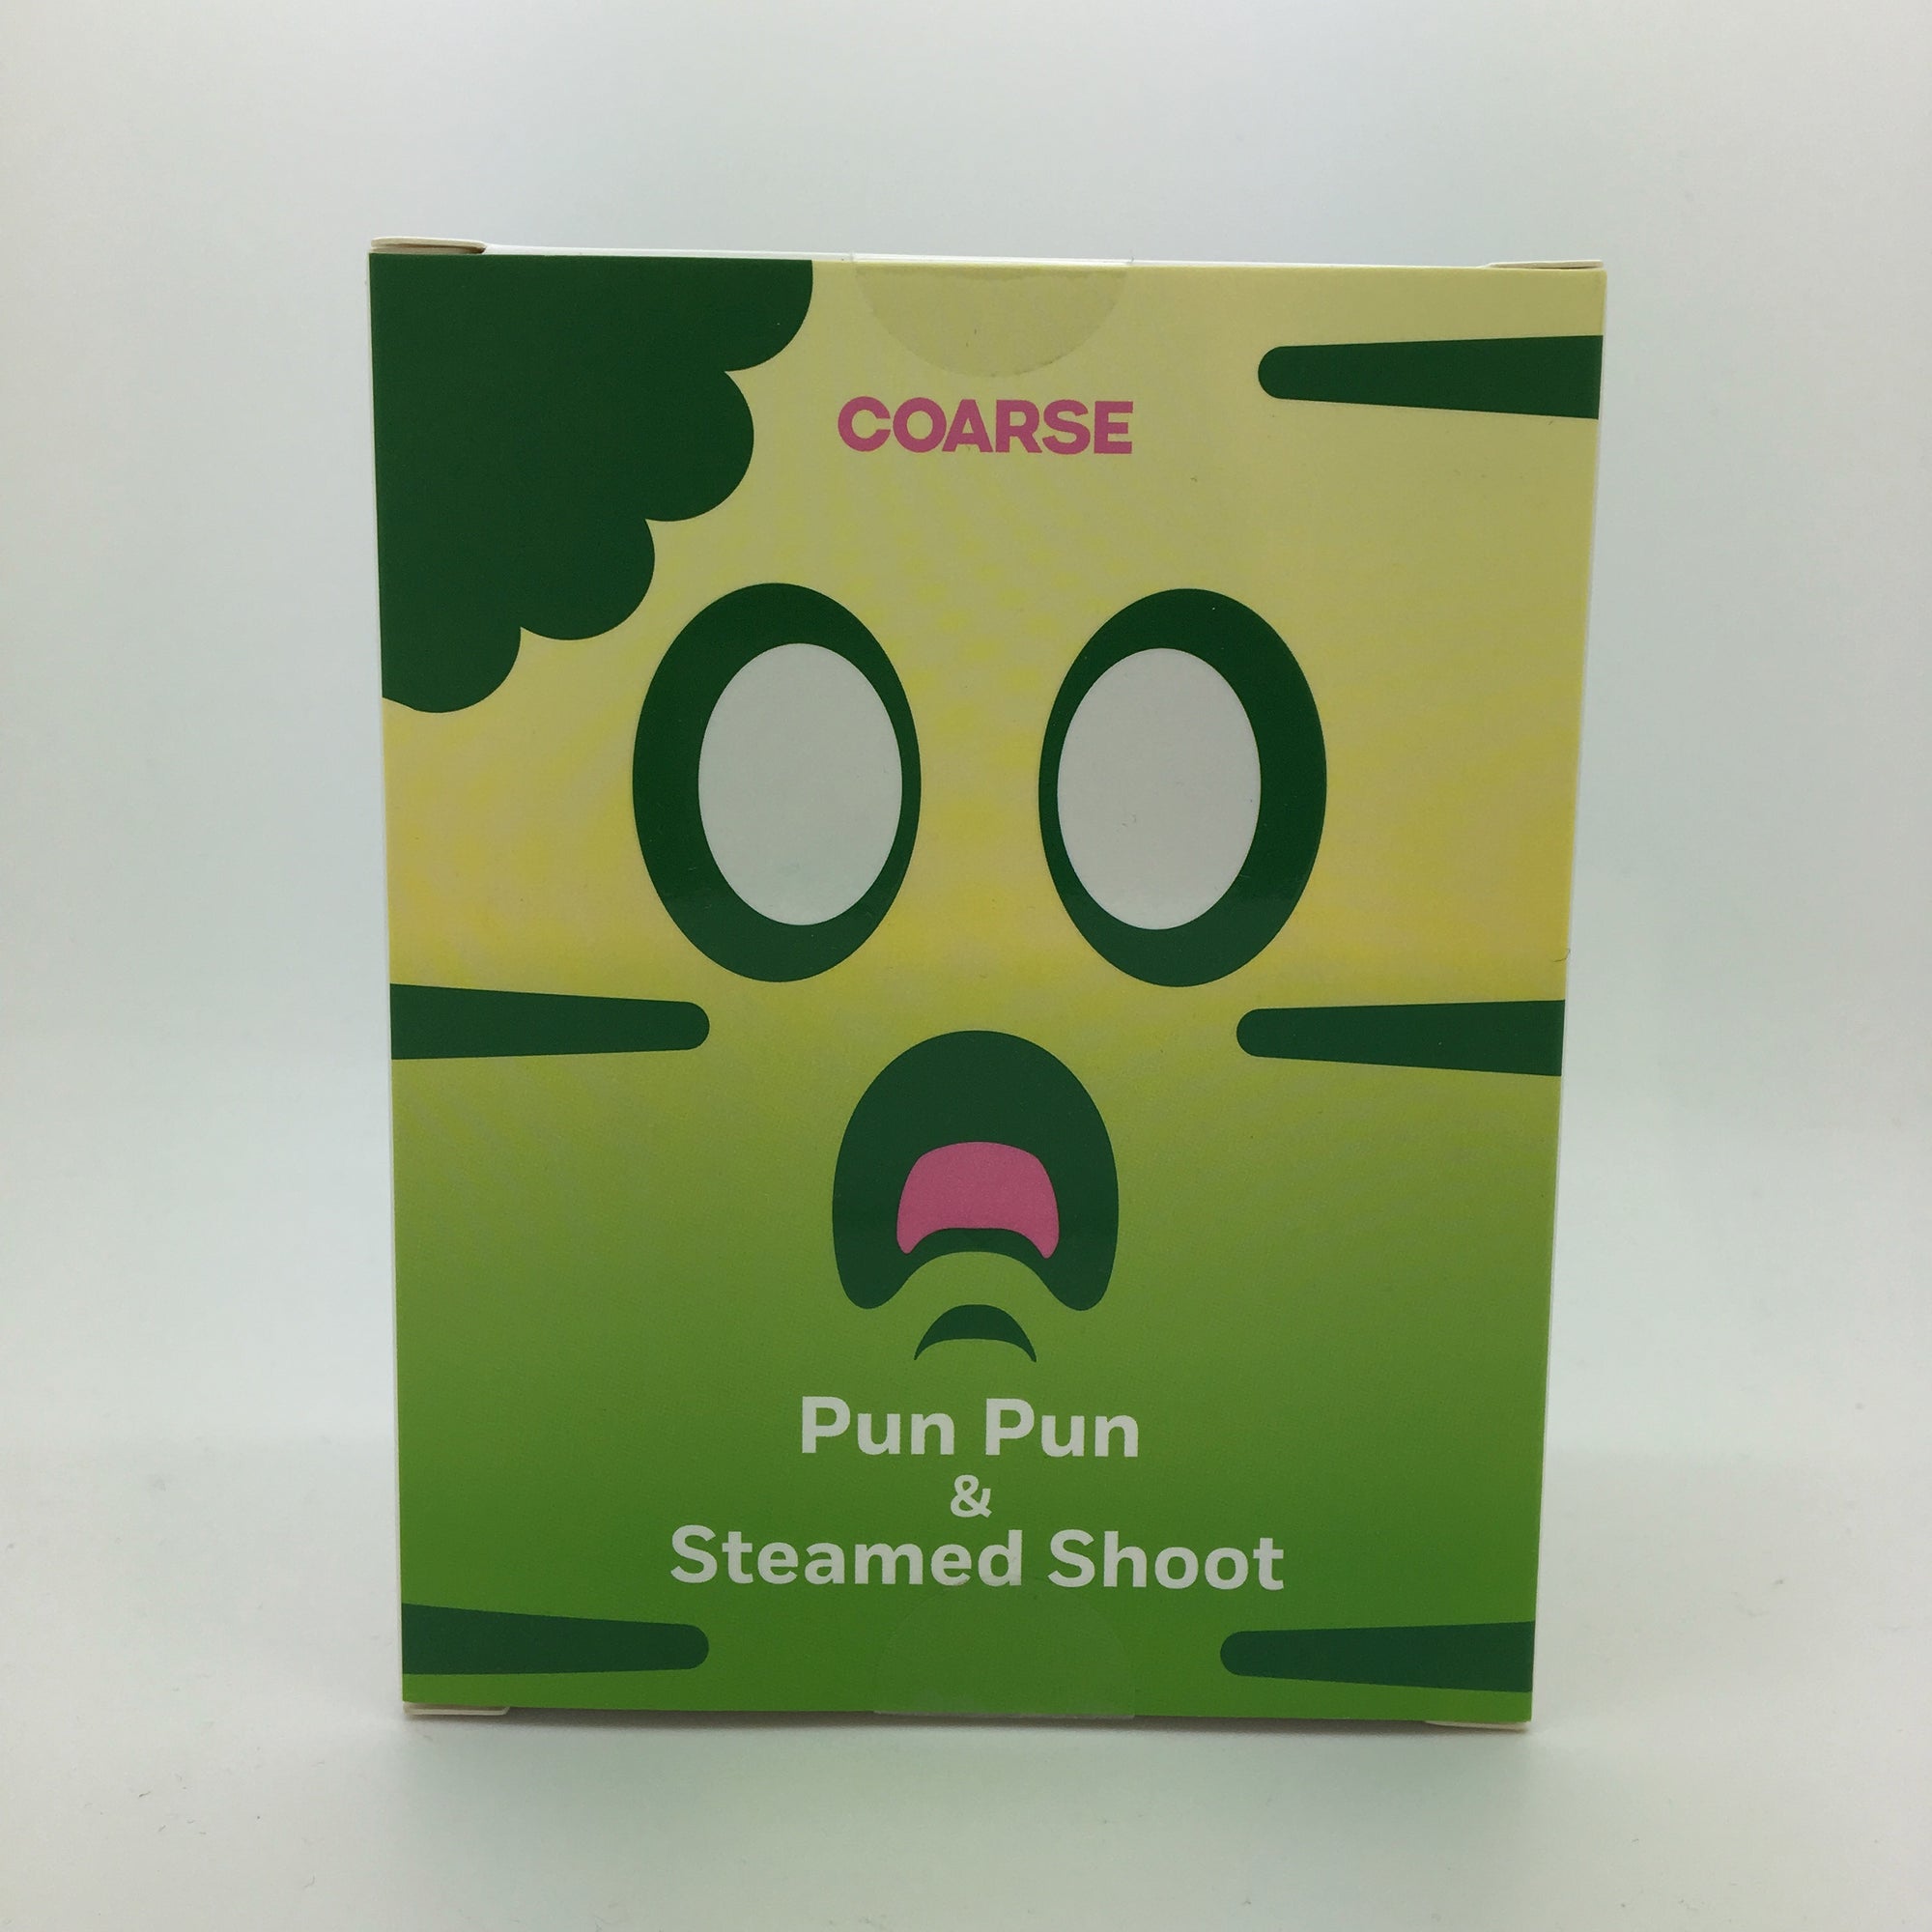 Pun Pun and Steamed Shoot by Coarse Toys